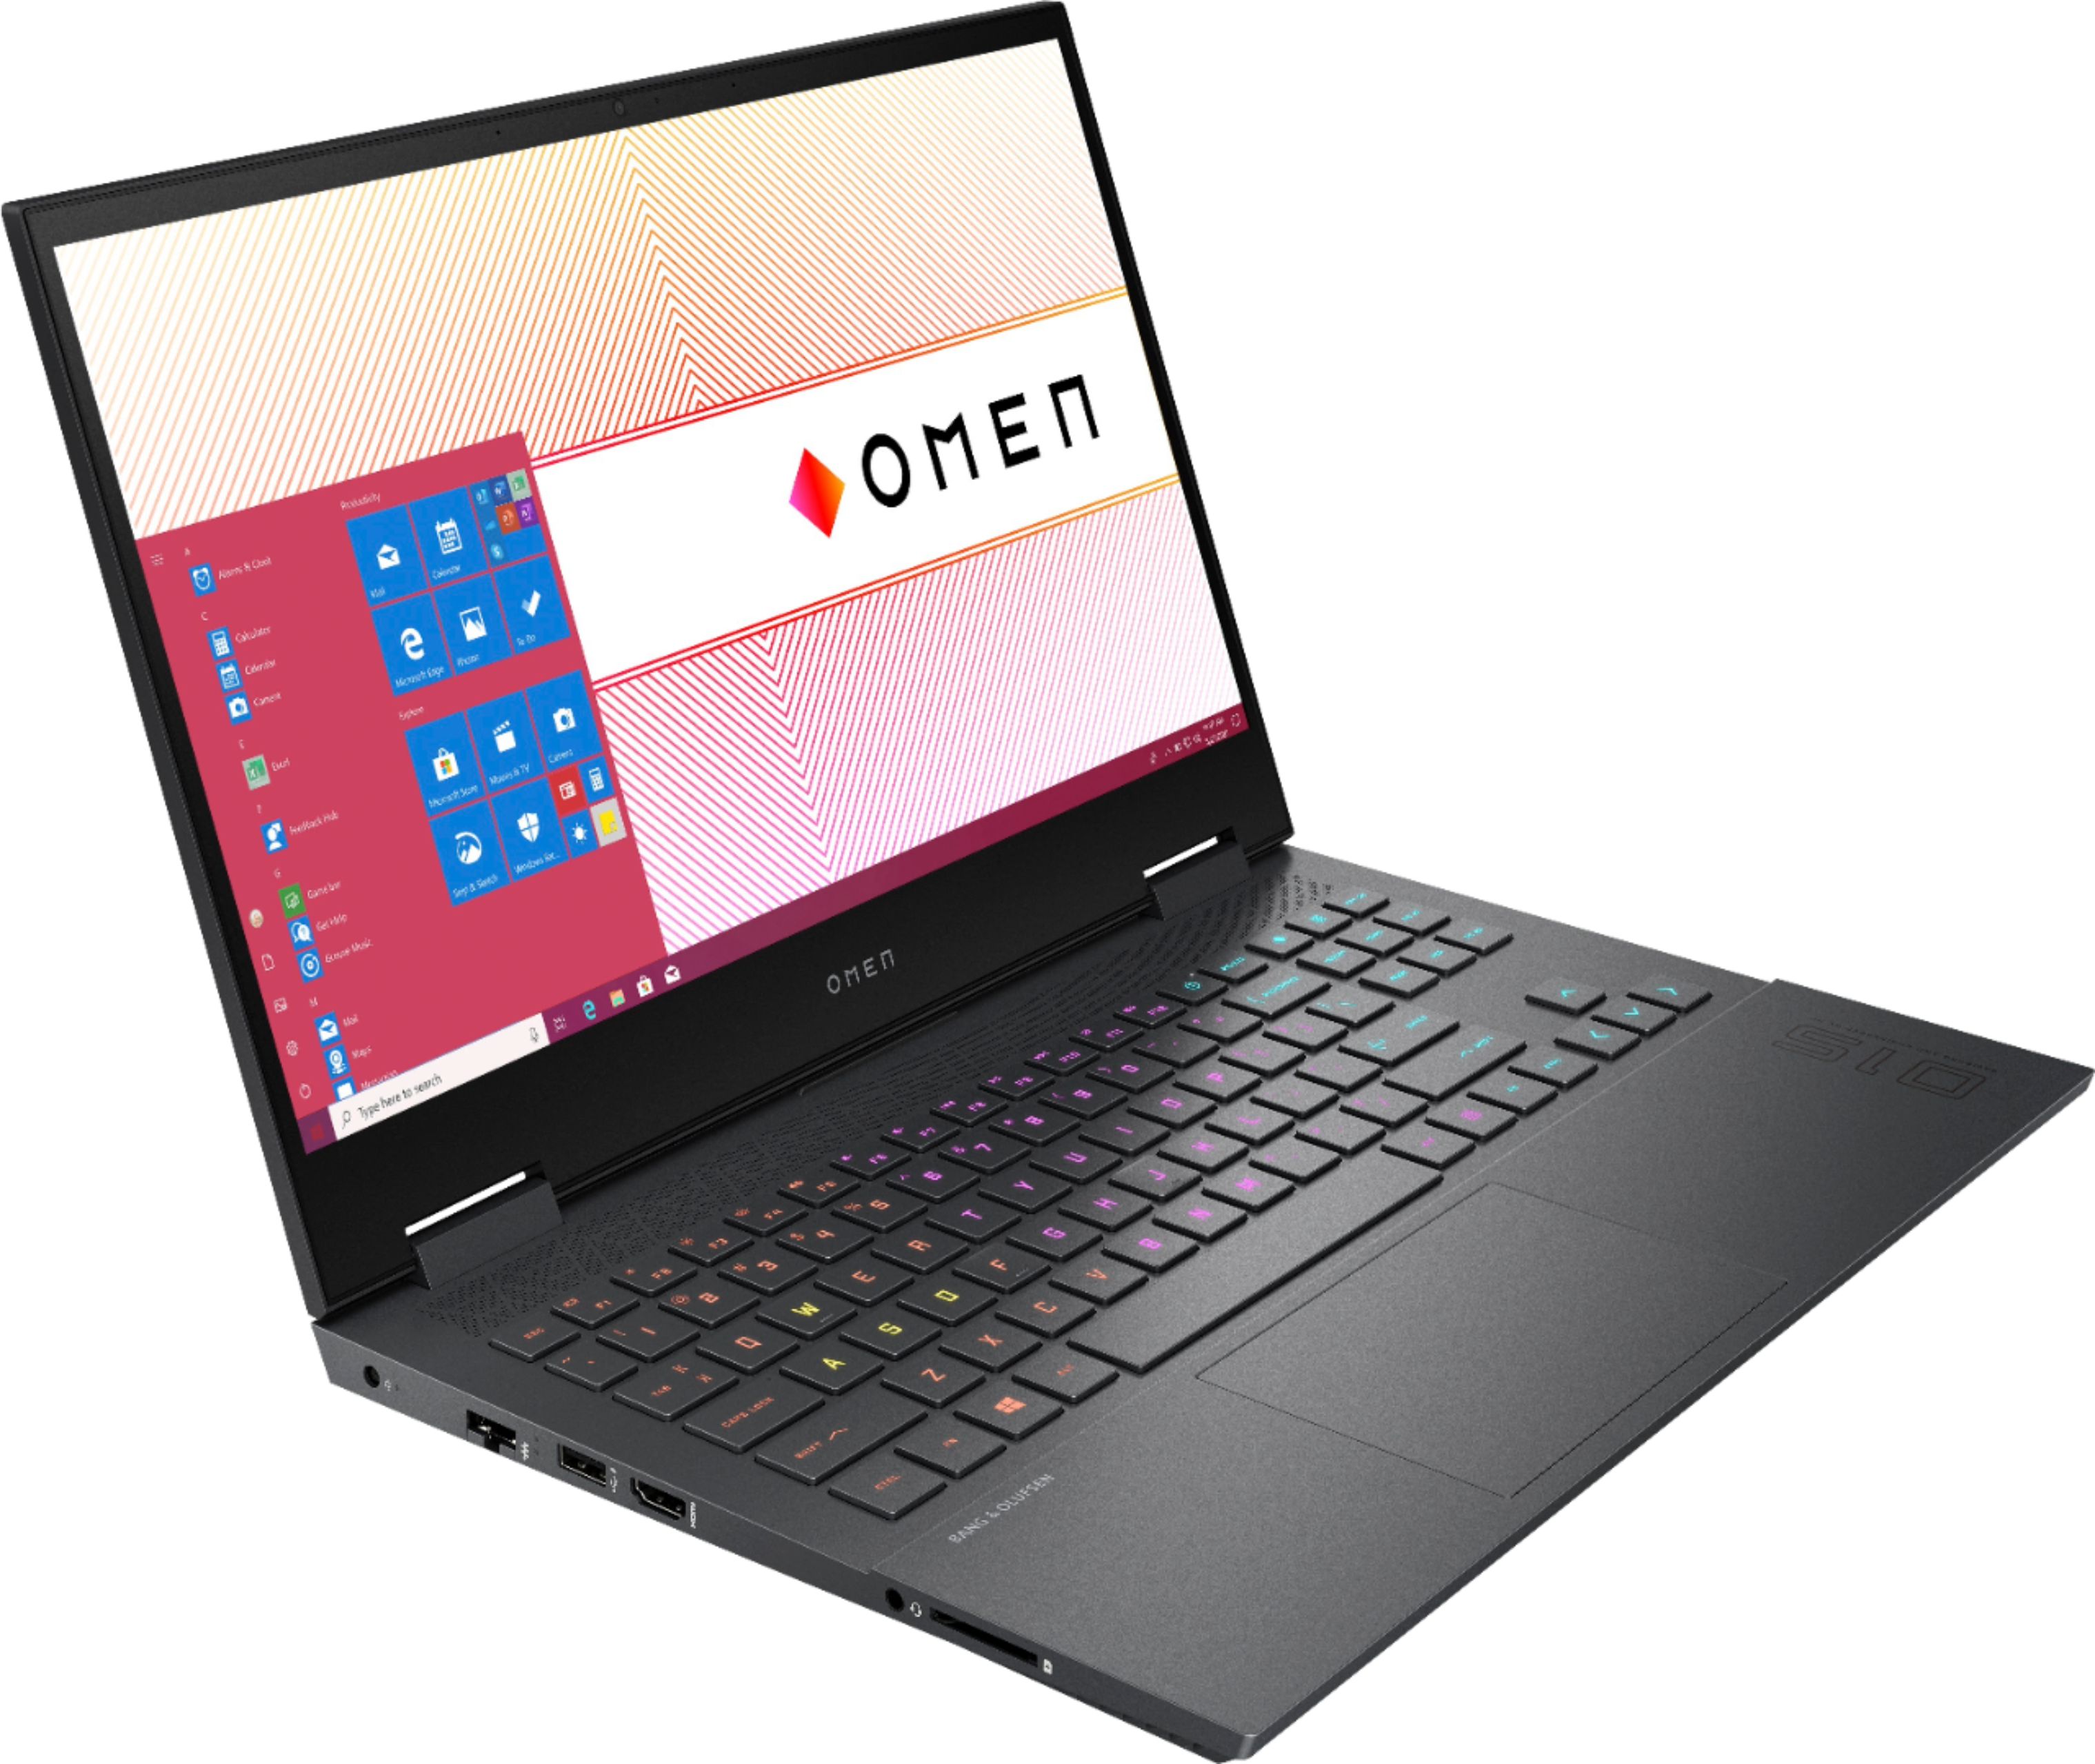 Angle View: HP OMEN - 15.6" Gaming Laptop - AMD Ryzen 7 - 16GB Memory - NVIDIA GeForce RTX 3060 - 512GB SSD - Mica Silver